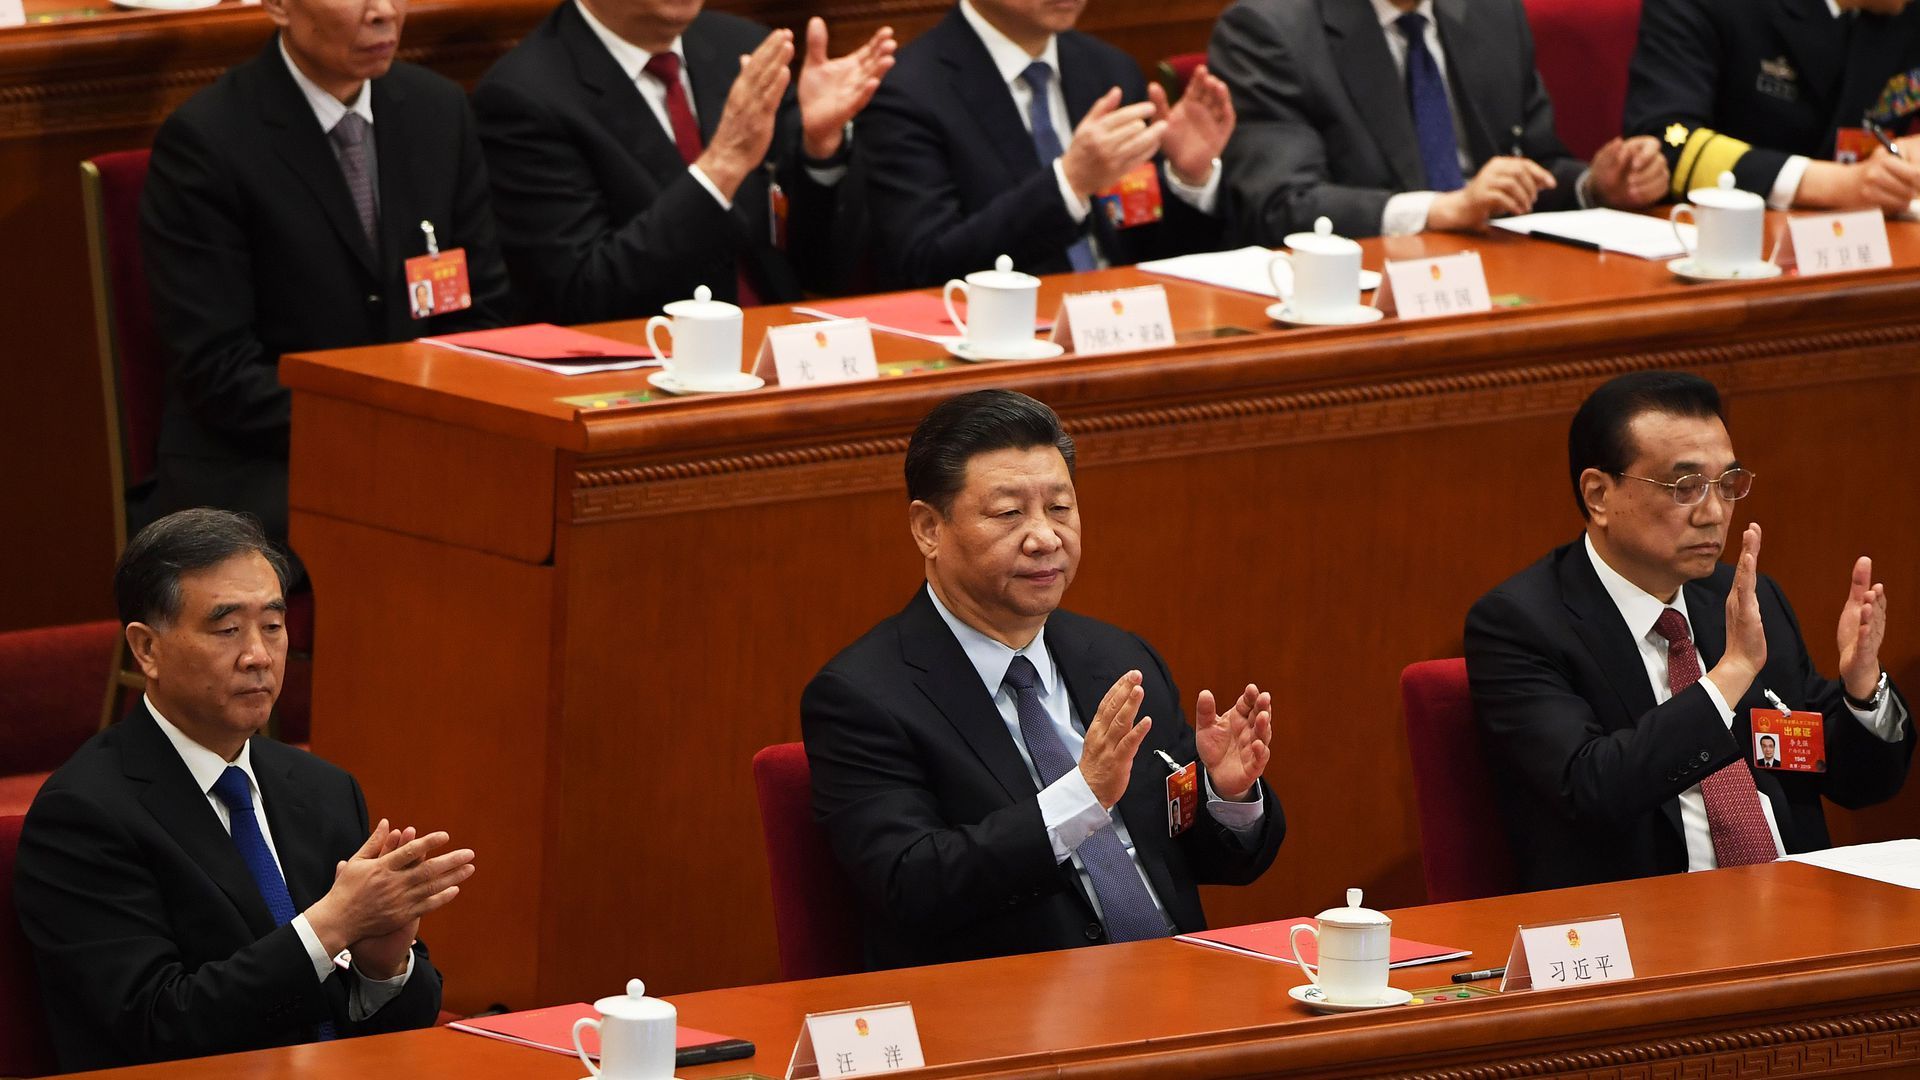 President Xi Jinping and other Chinese officials applaud at the National People's Congress.